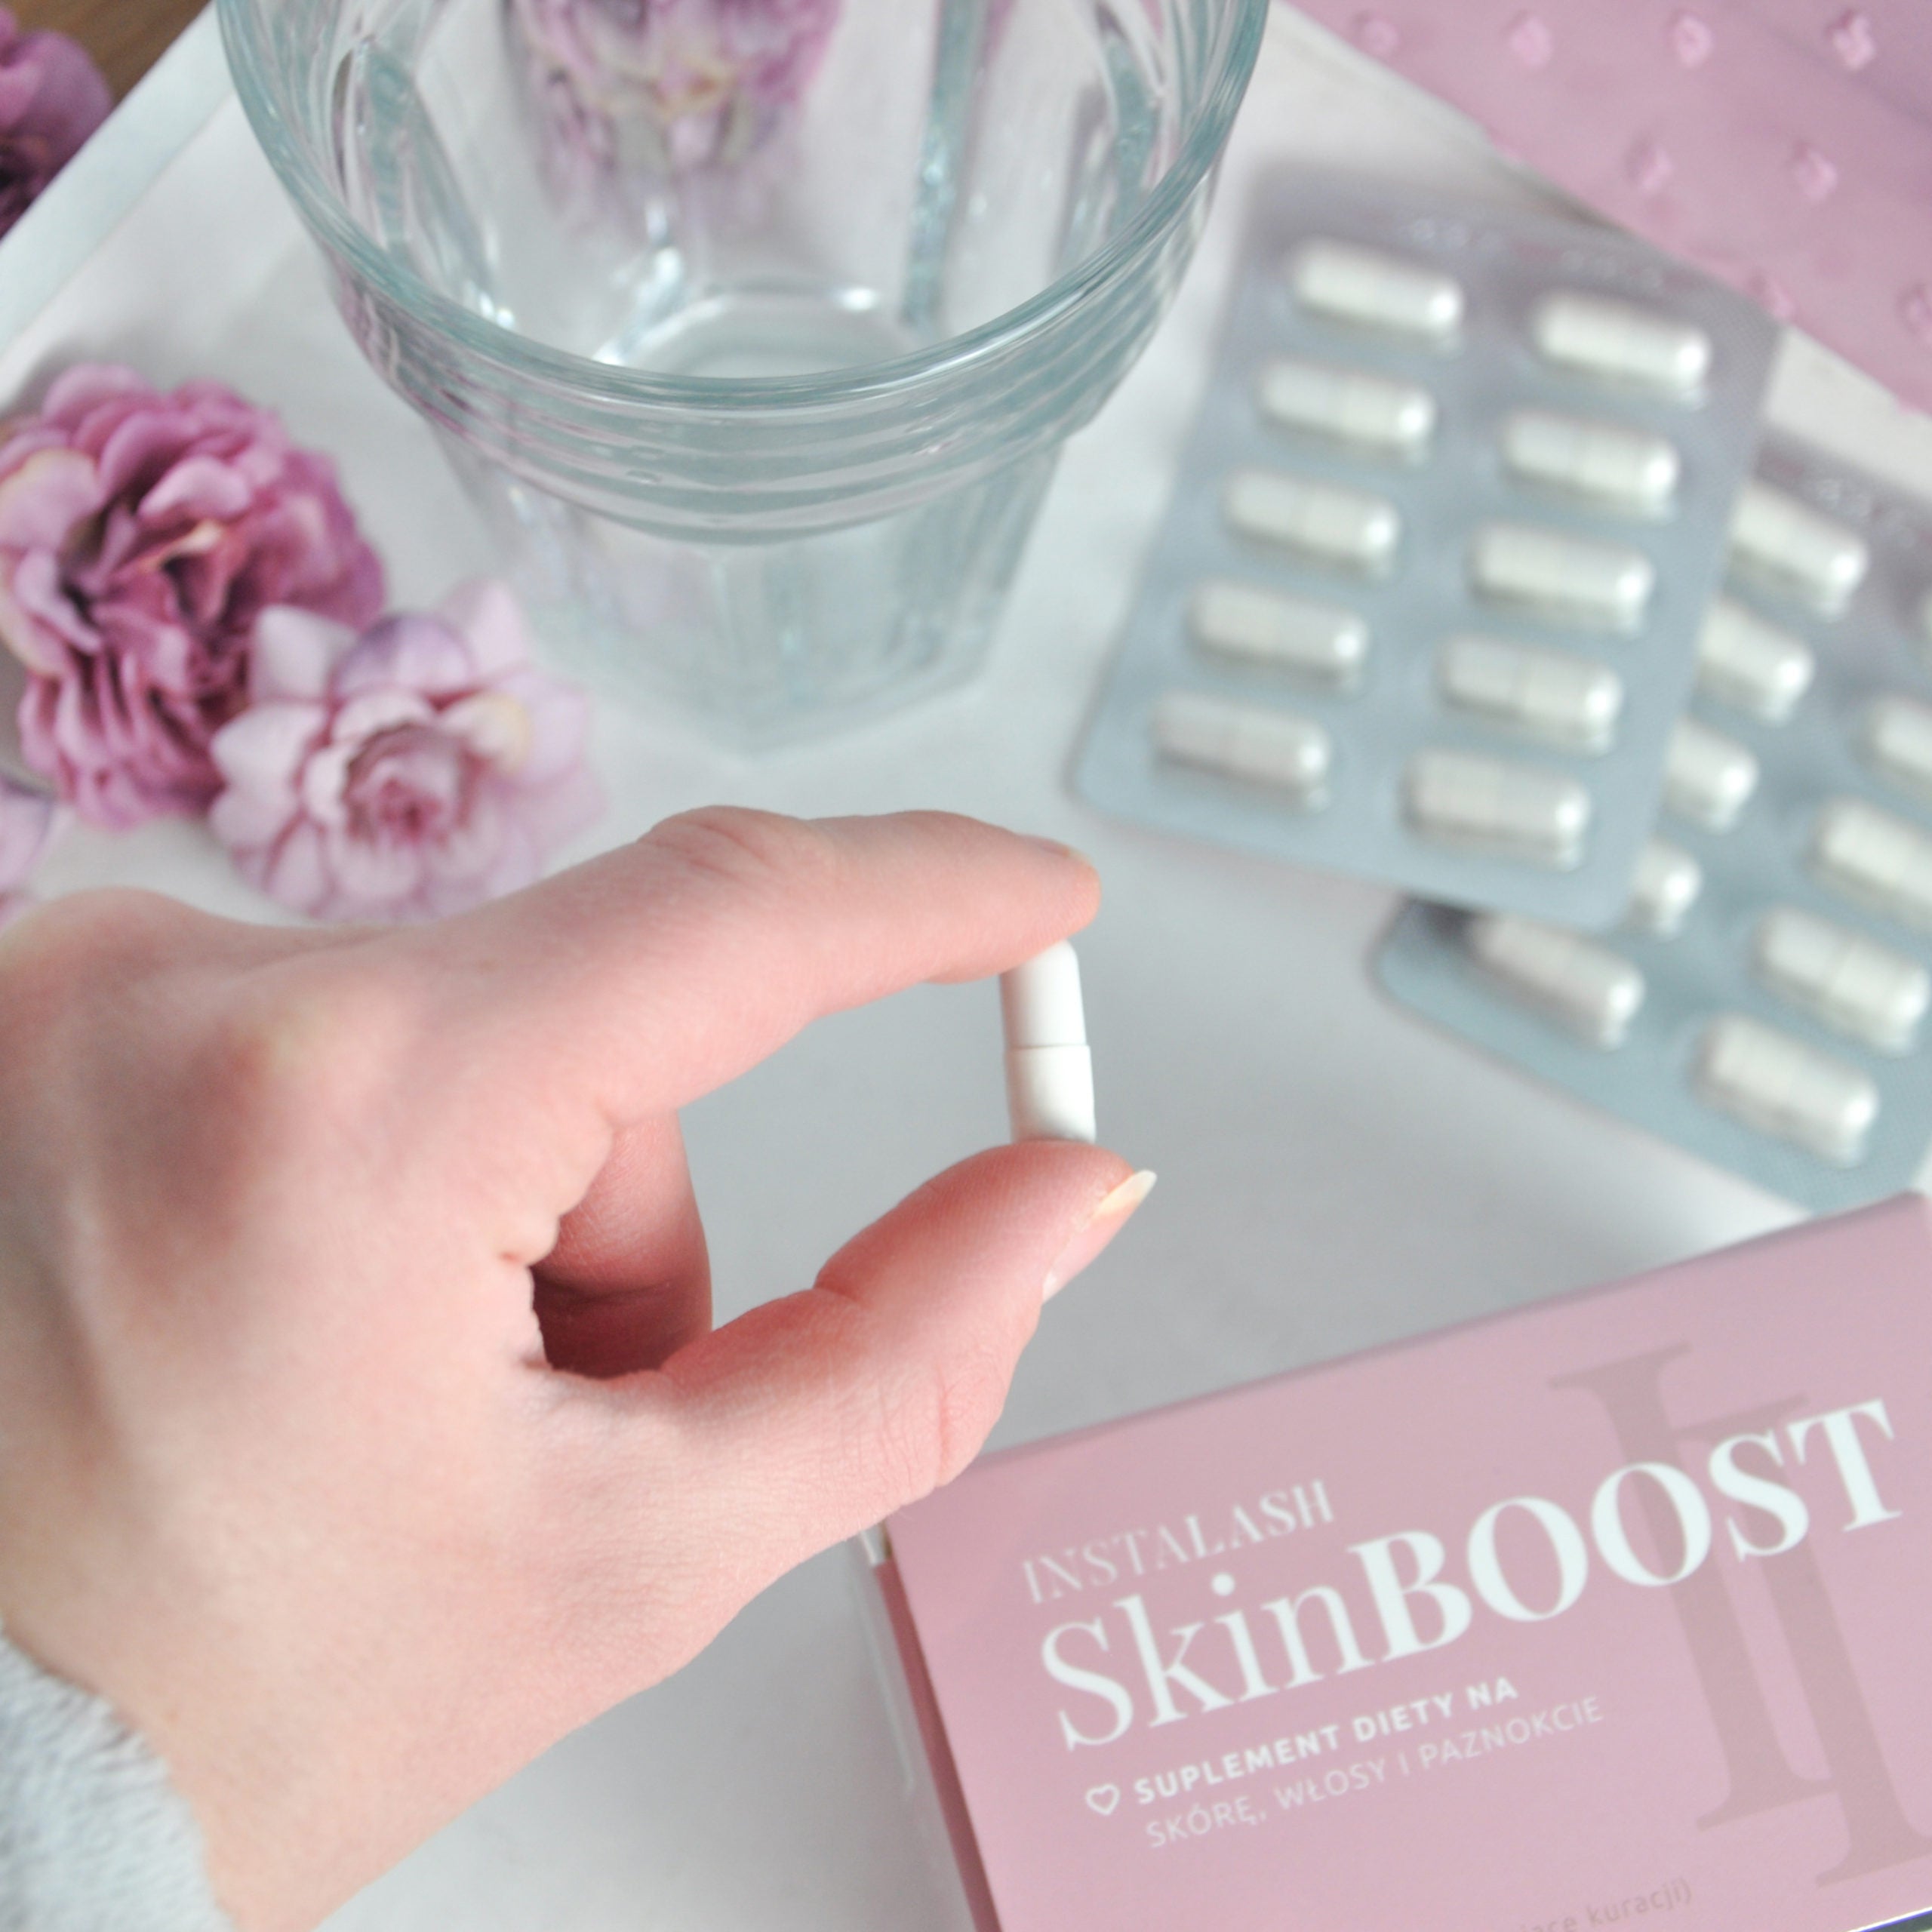 Instalash SkinBOOST – Dietary Supplement for Skin, Hair, Eyelashes &amp; Nails 60 capsules, open packaging